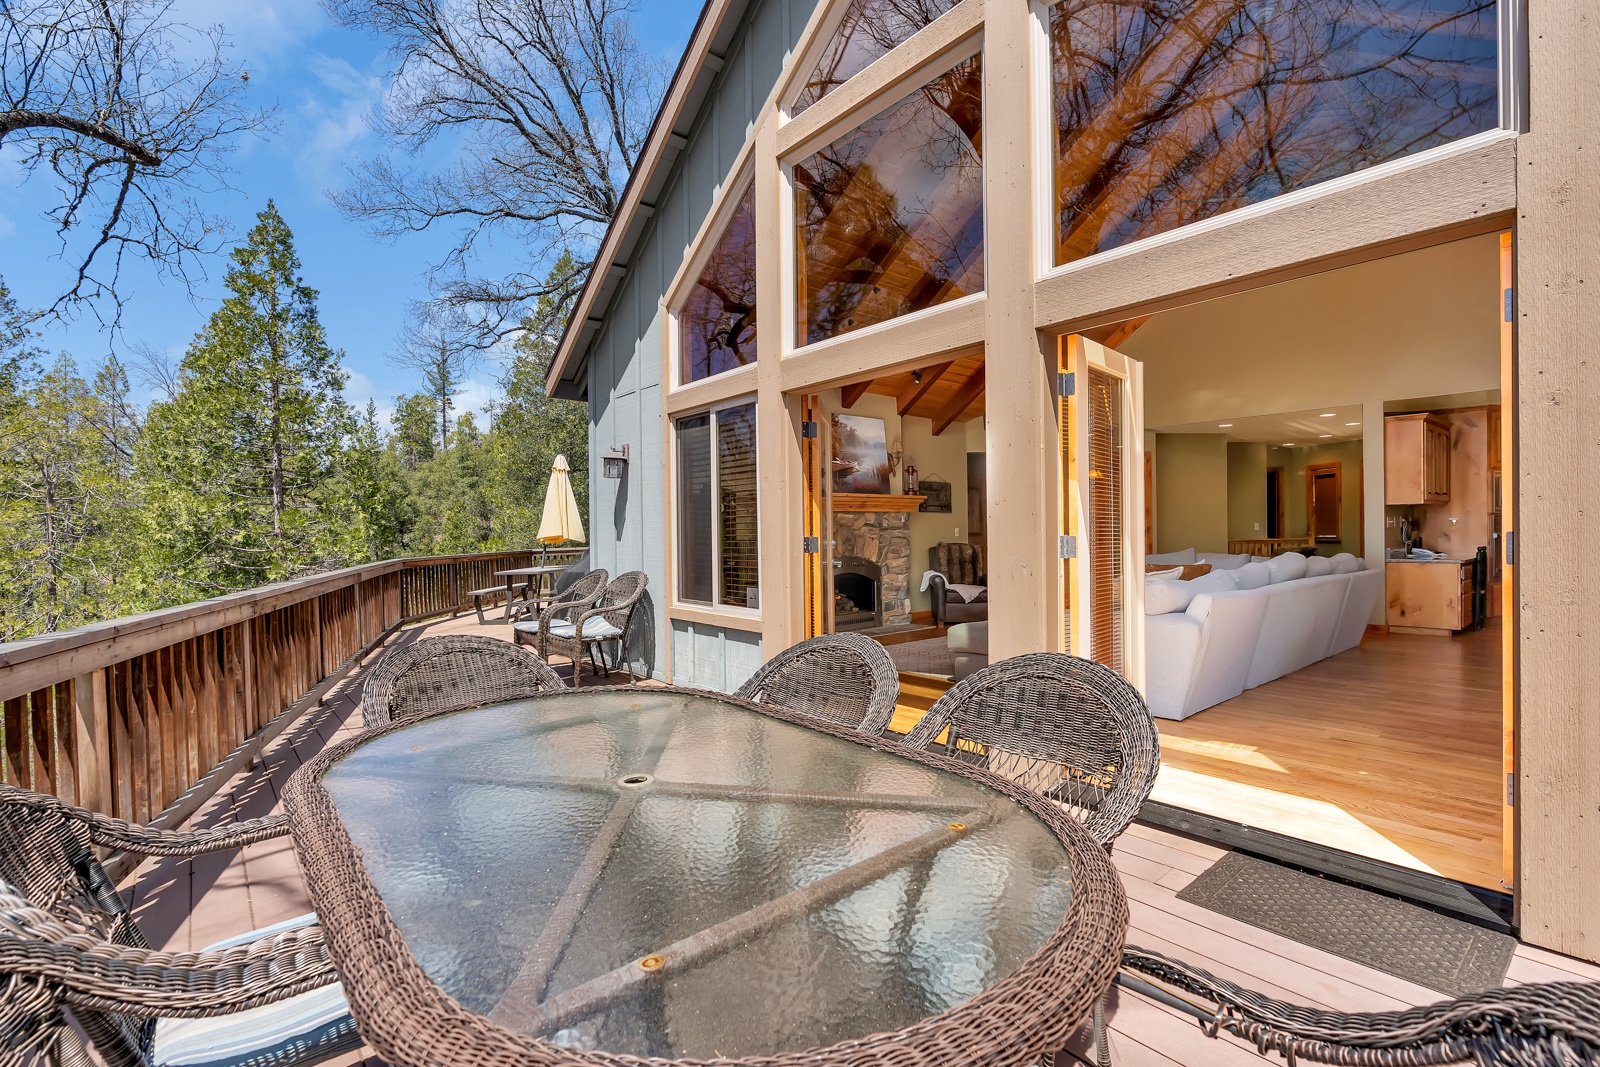 Lounge and dine in the sunshine on the expansive back deck